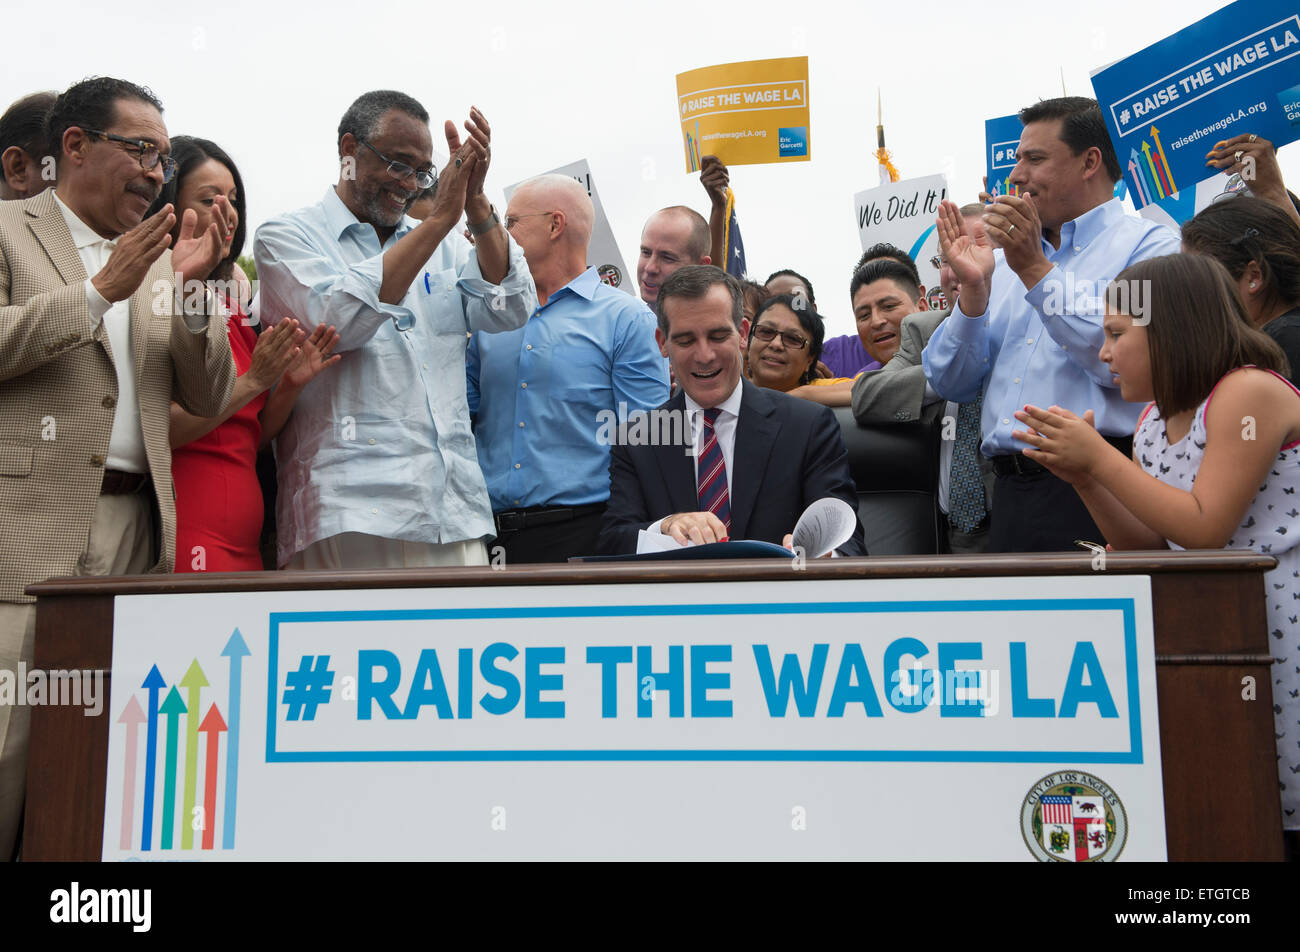 Los Angeles, Los Angeles, USA. 13th June, 2015. Los Angeles Mayor Eric Garcetti signs the city' s new minimum wage ordinance at Martin Luther King Jr. Park, south Los Angeles, on June 13, 2015. Under the new ordinance, the city' s minimum wage will rise to 10.50 U.S. dollars in July 2016 and gradually grow to 15 U.S. dollars an hour by 2020. The city currently follows the state-set minimum wage of 9 U.S. dollars. © Yang Lei/Xinhua/Alamy Live News Stock Photo